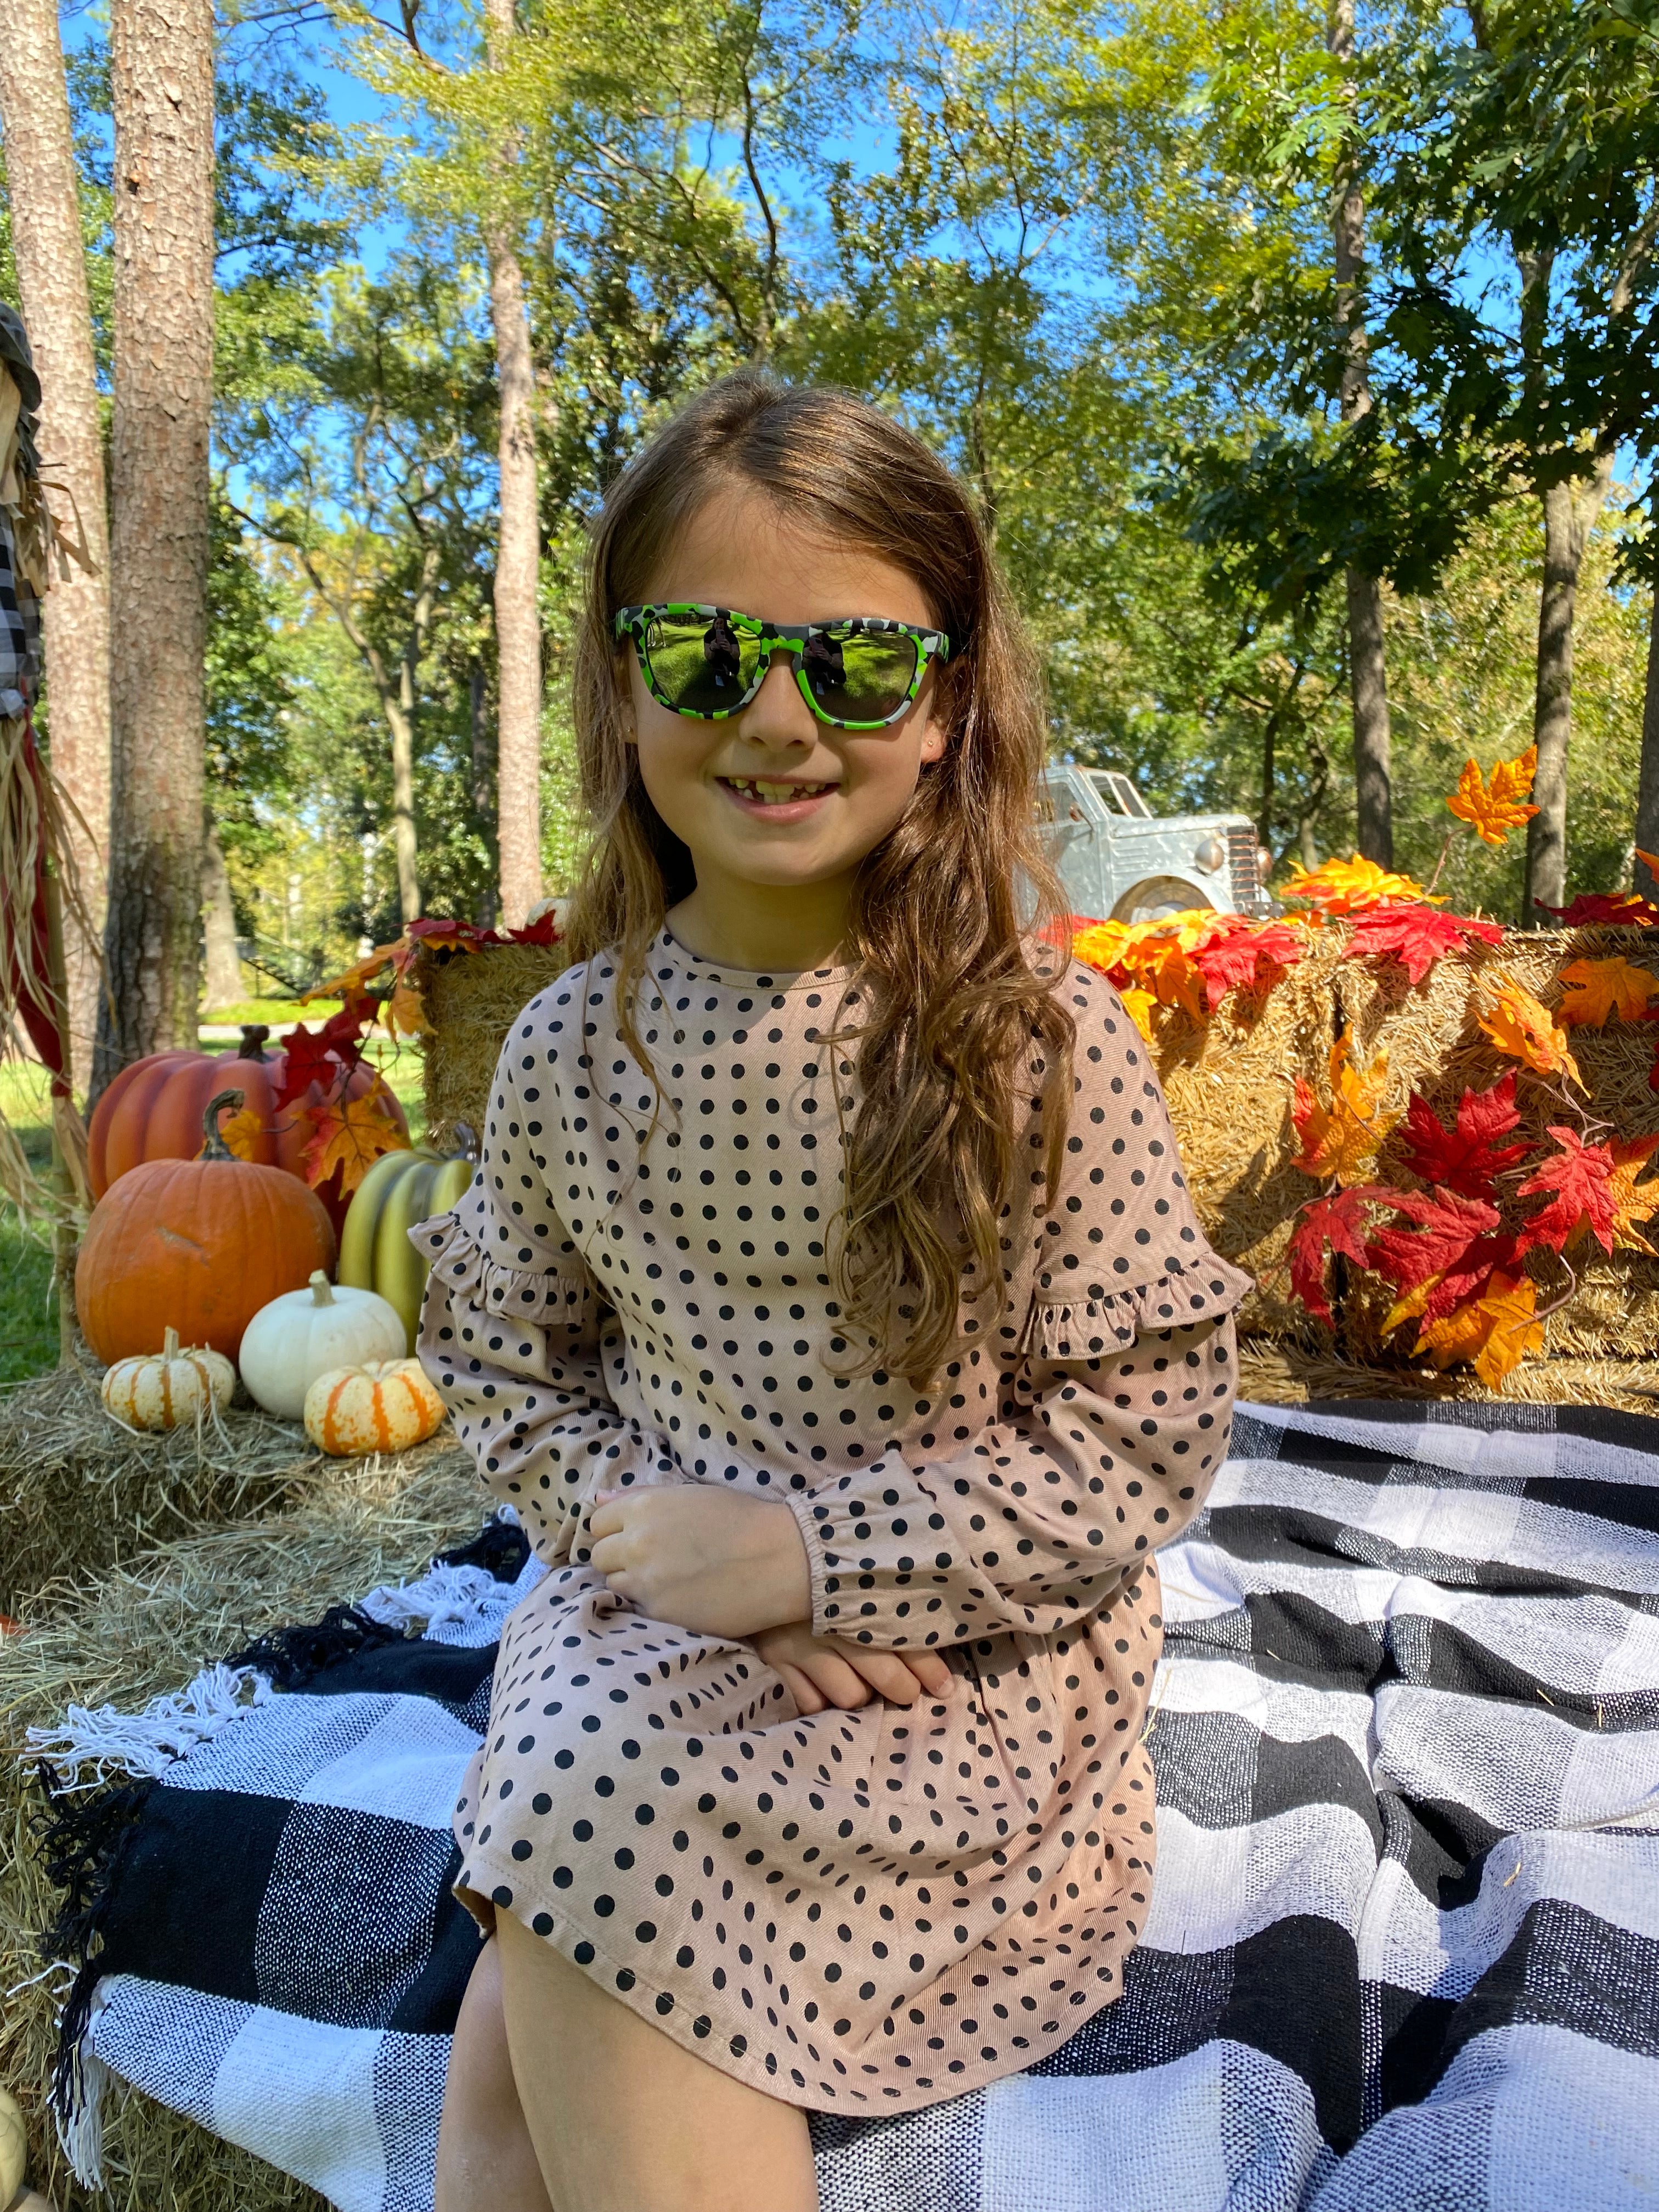 Little girl sitting in a fall dress with pumpkins around wearing polarized kids sunglasses by Sunnies shades in a green camo print with silver reflective lenses.